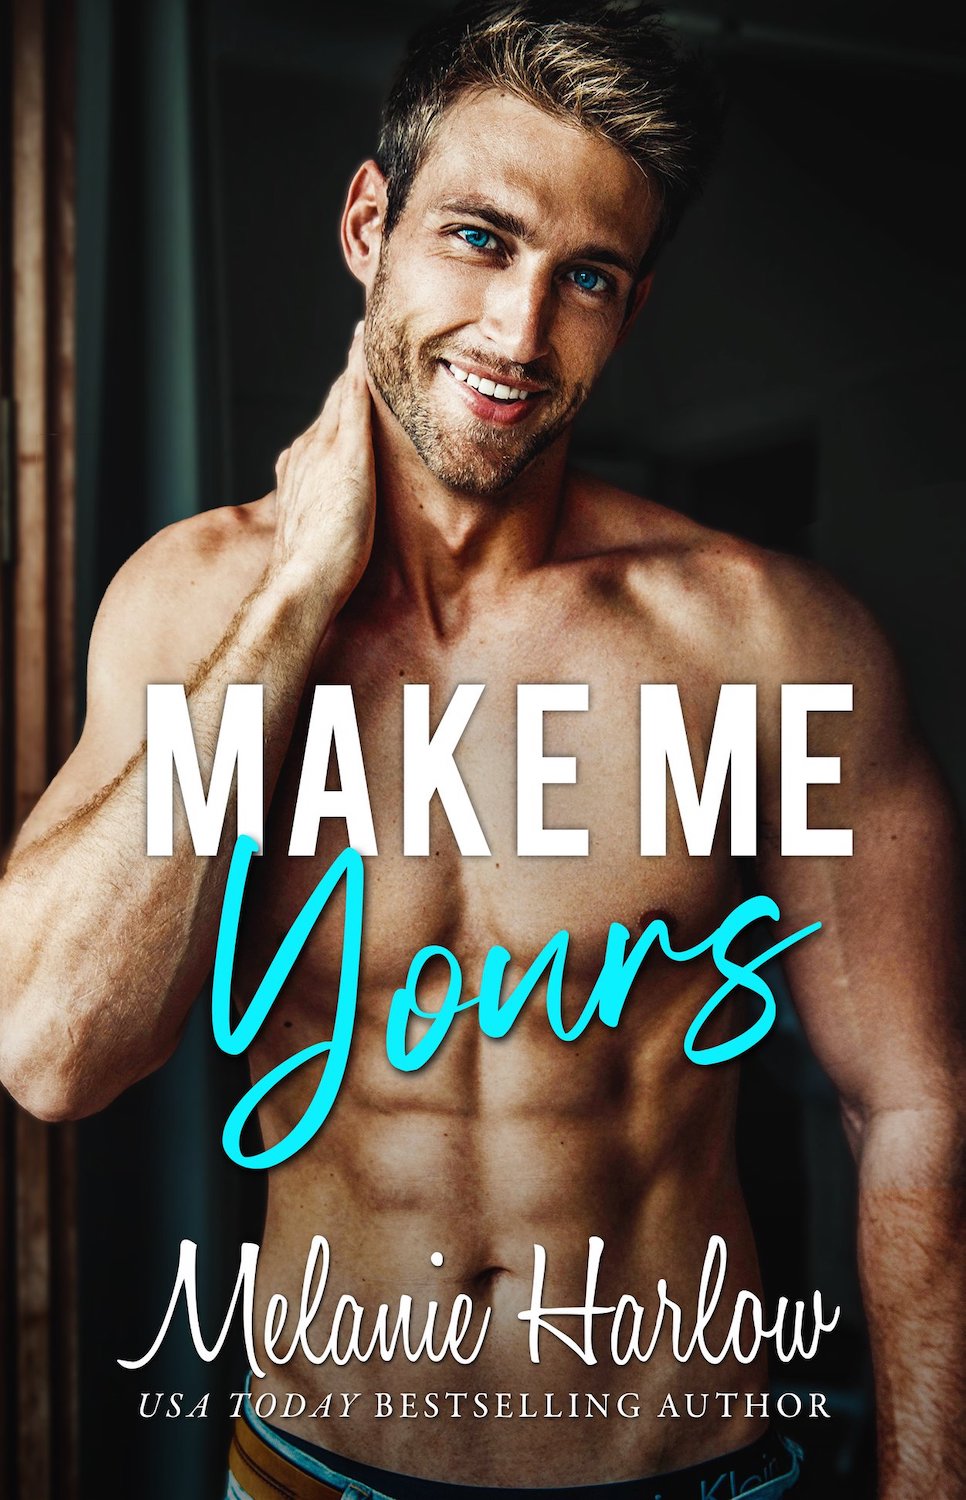 Dirty Muscle Melanie Porn - COVER REVEAL: Make Me Yours by Melanie Harlow : Natasha is a Book Junkie